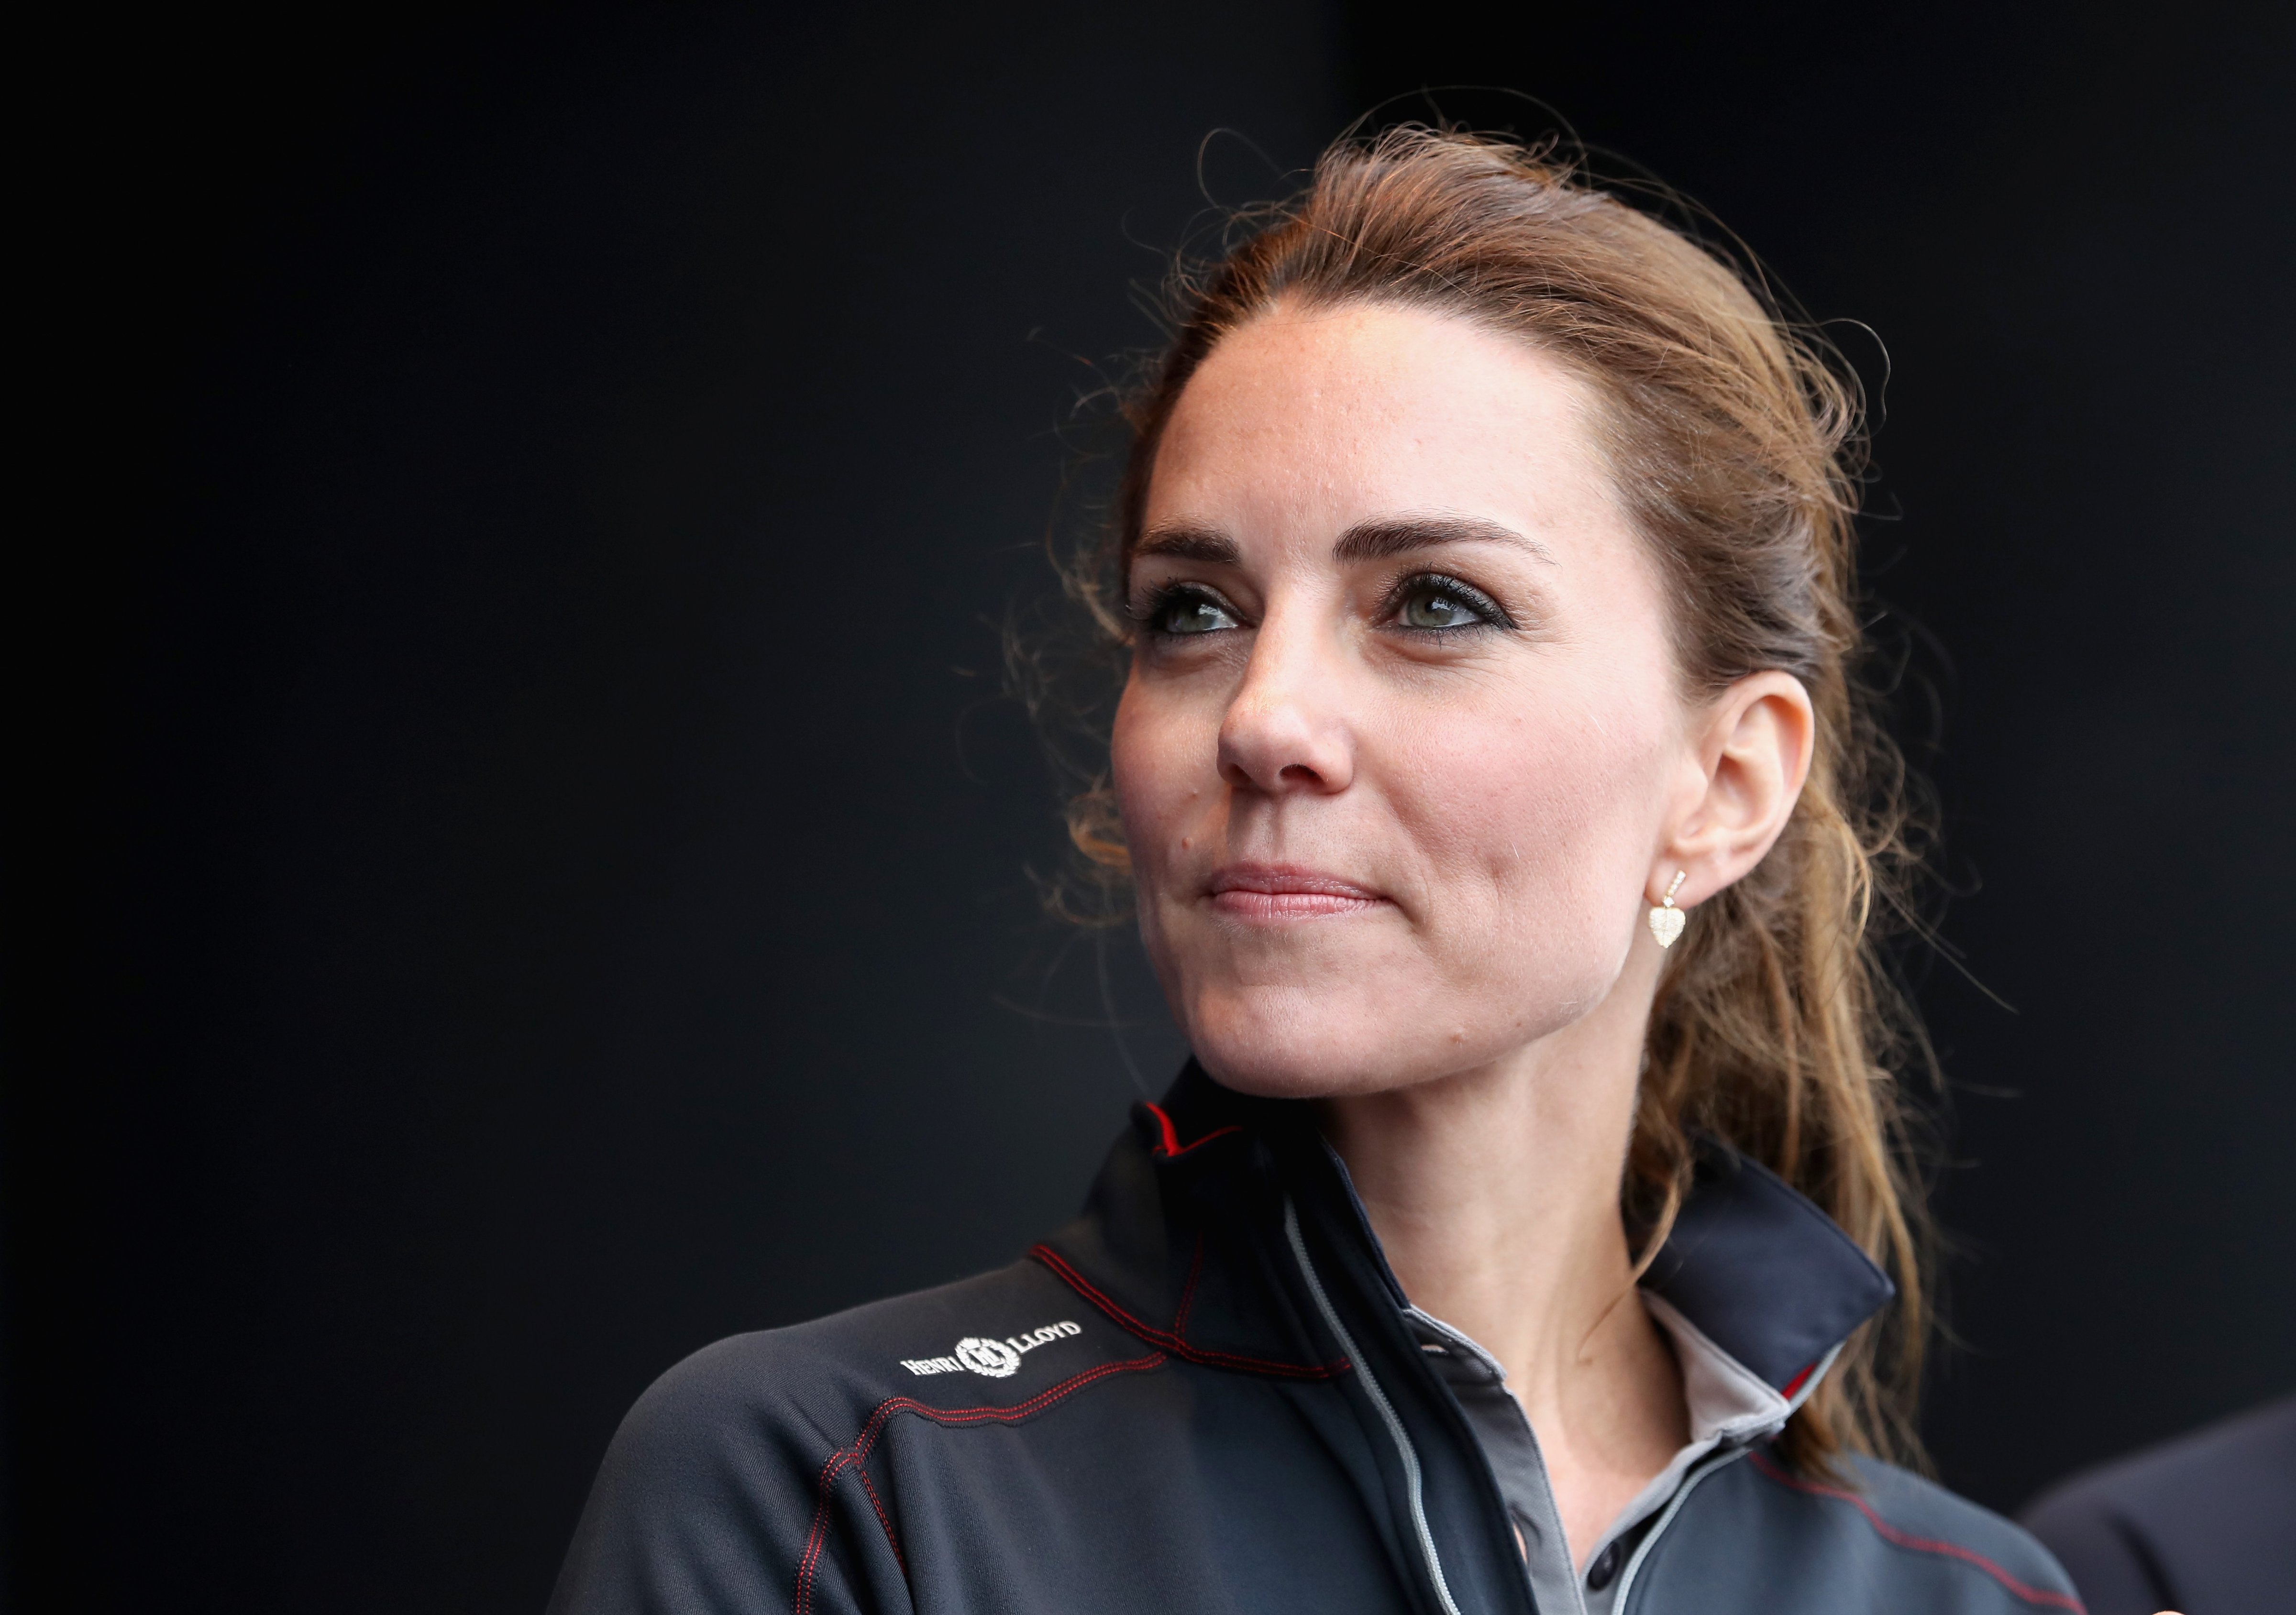 PORTSMOUTH, ENGLAND - JULY 24:  Catherine, Duchess of Cambridge is seen on stage at the America's Cup World Series on July 24, 2016 in Portsmouth, England.  (Photo by Chris Jackson/Getty Images) (Chris Jackson/Getty Images)